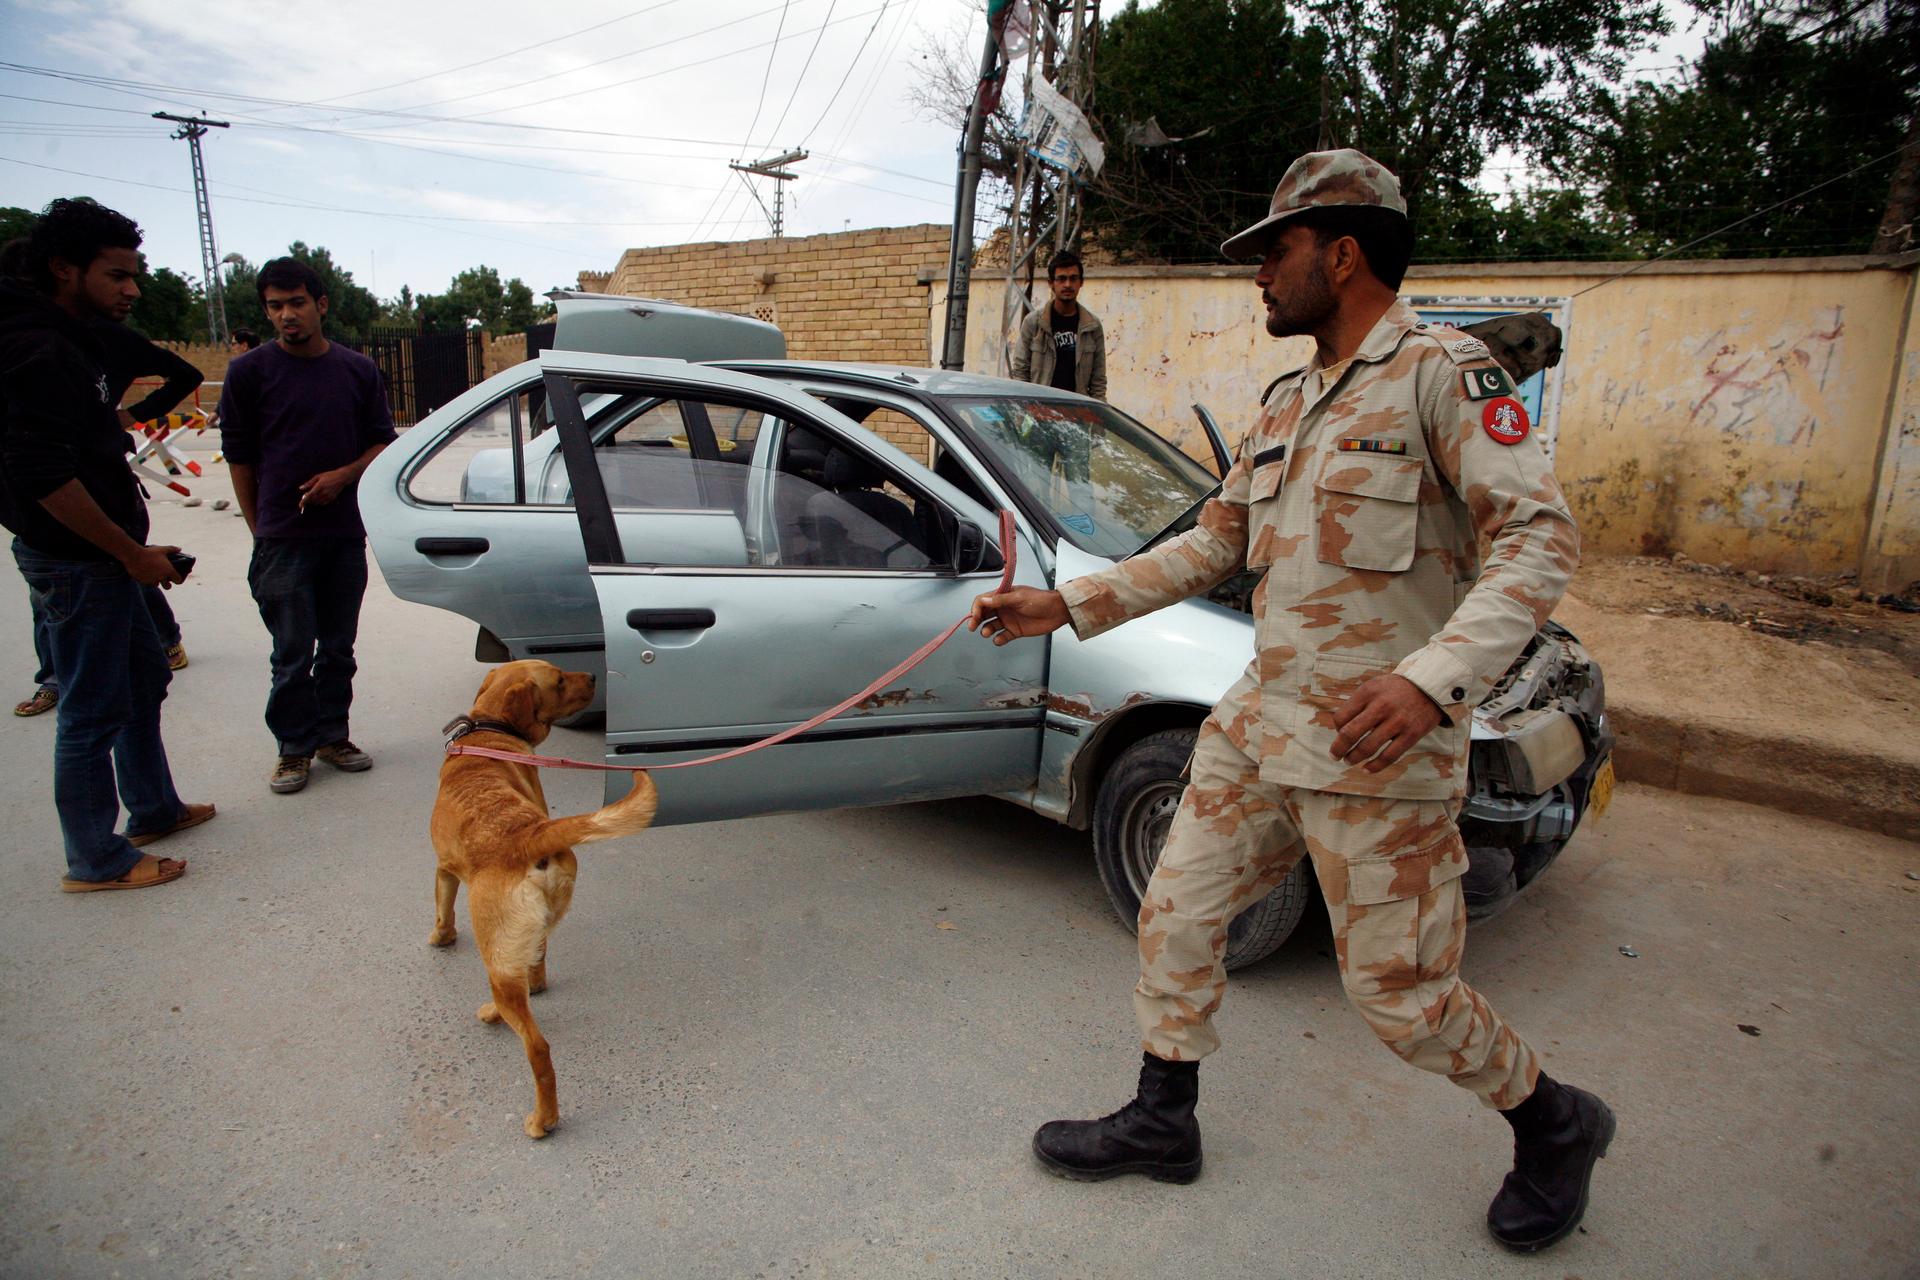 A Pakistani soldier and his sniffer dog search a vehicle at the entrance of a Hazara neighborhood in Quetta, Pakistan,